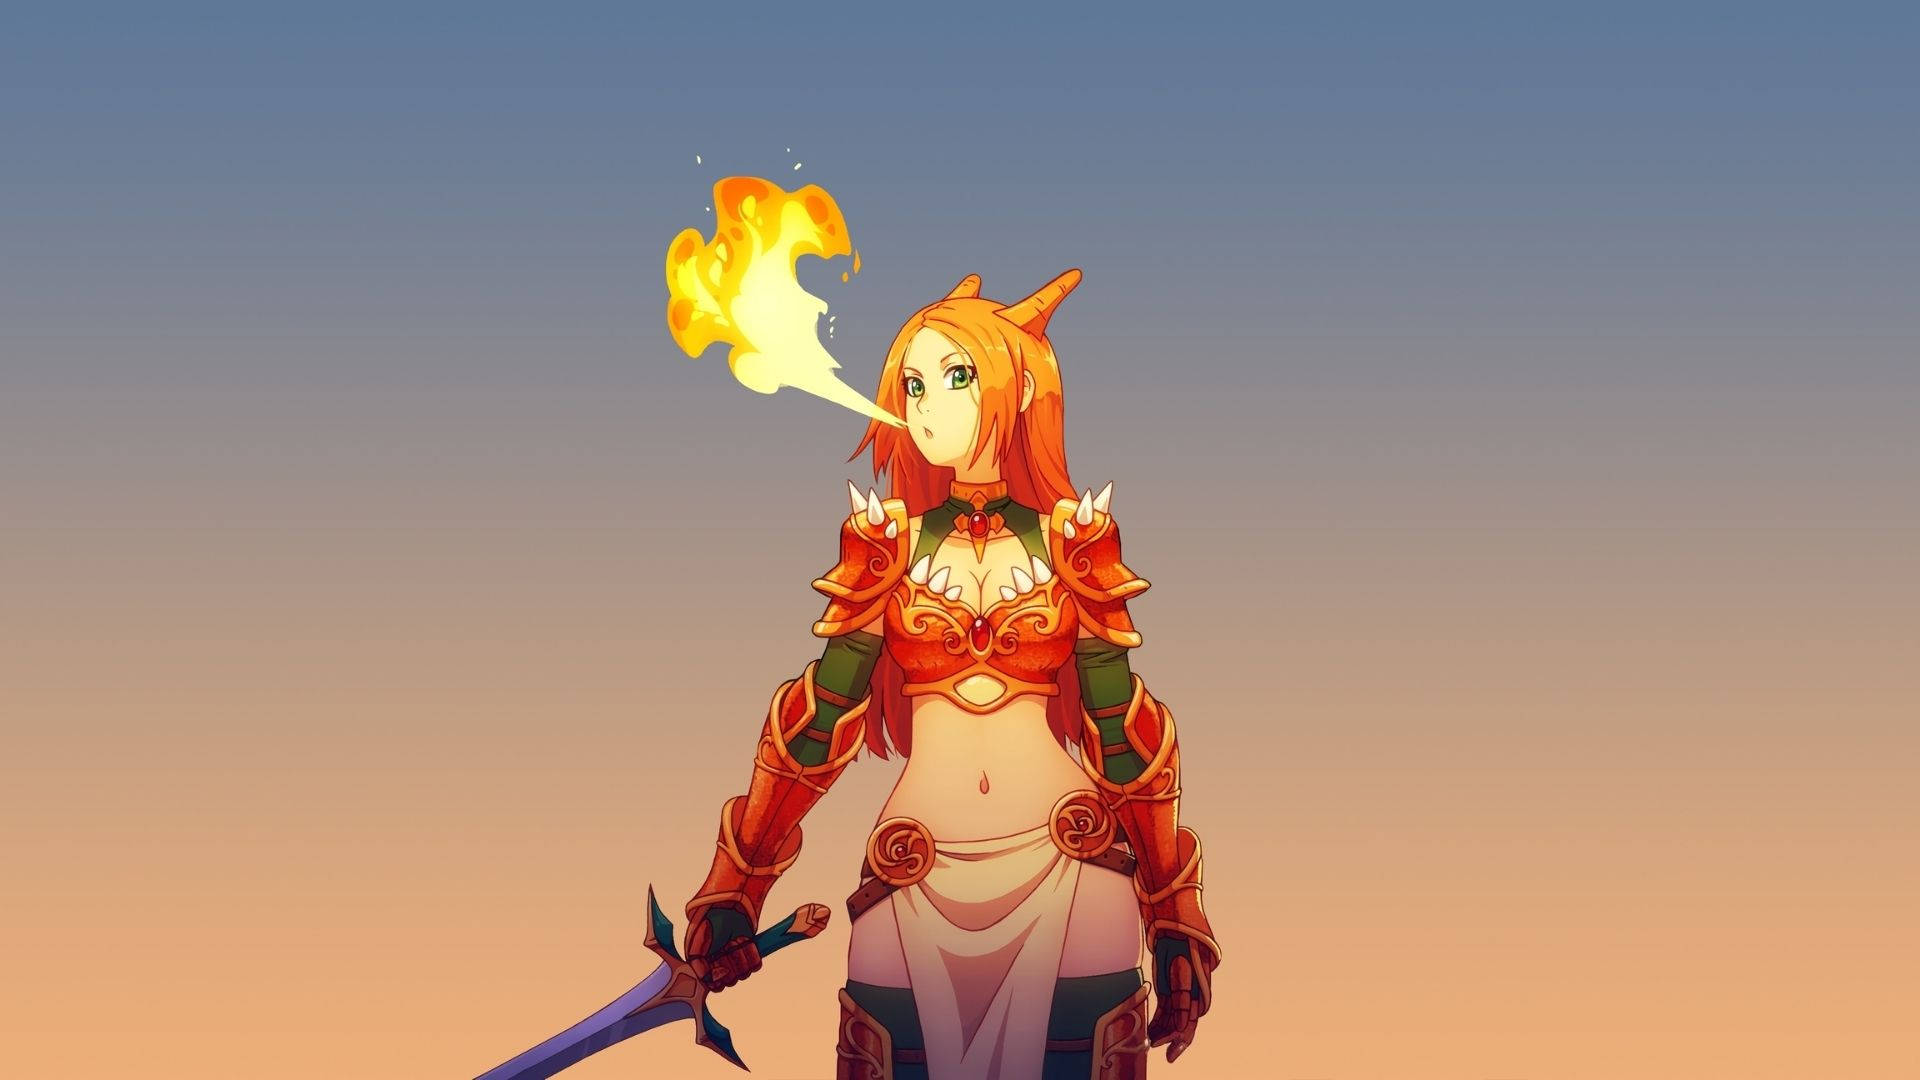 Fire Girl Blowing Flame